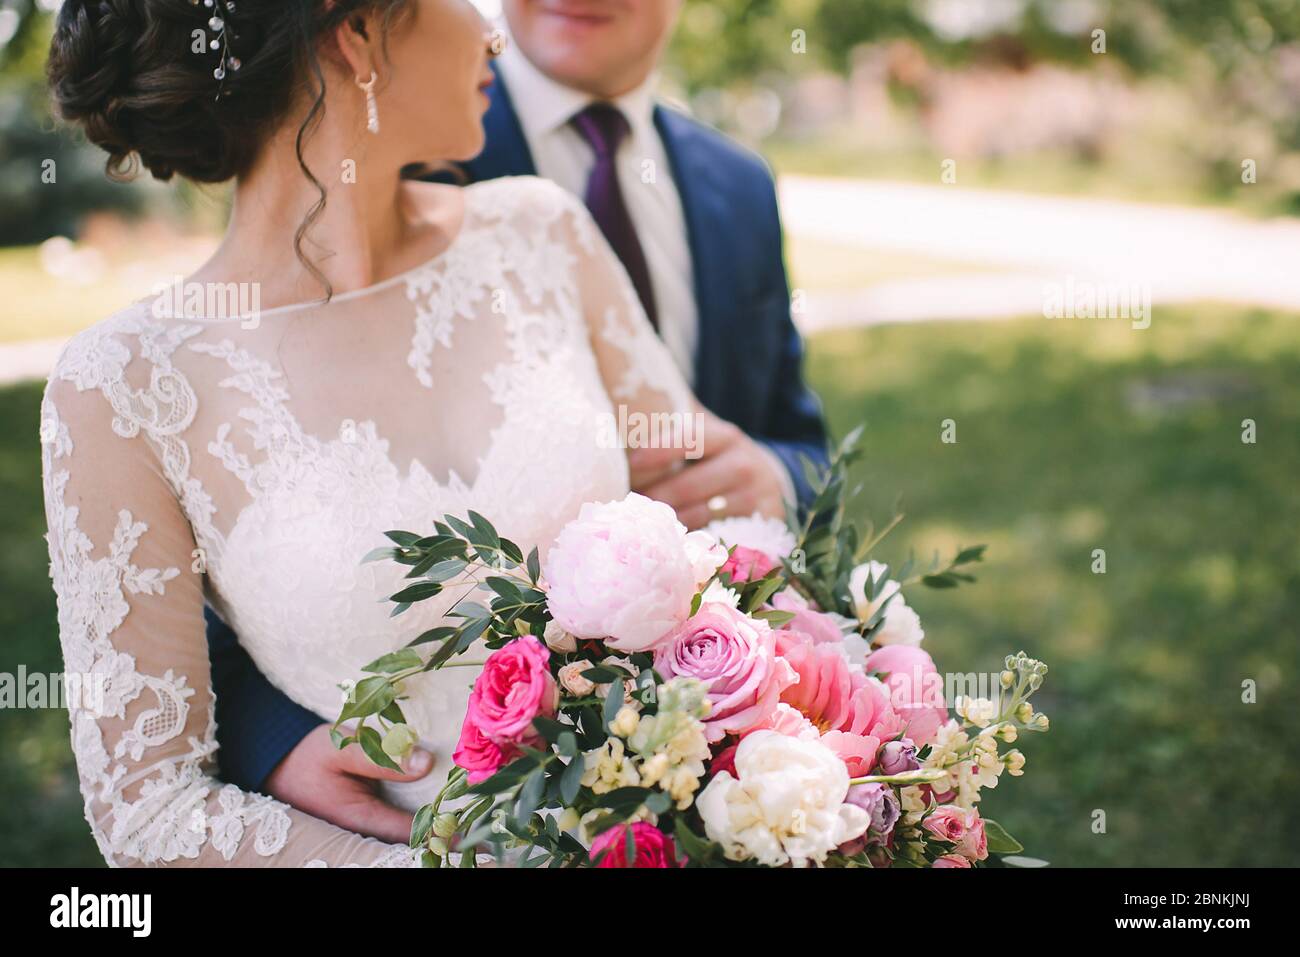 Close-up of a bride's bouquet of peonies, roses, eucalyptus in white-pink shades tied with pink ribbons. The bride holds a bouquet in her hand in a wh Stock Photo